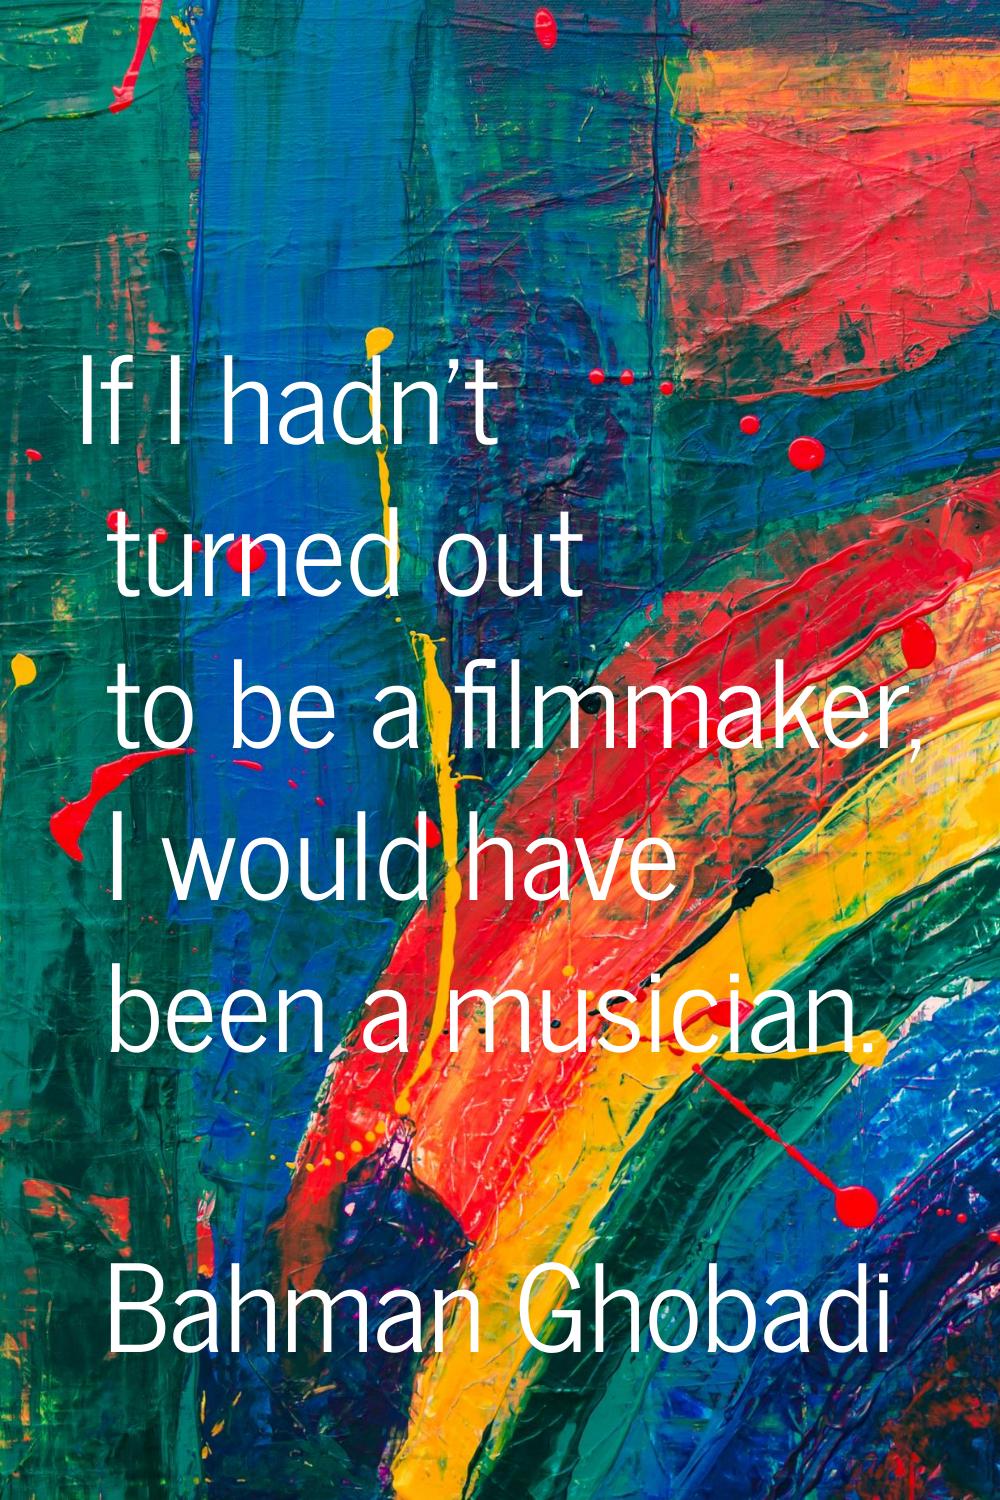 If I hadn't turned out to be a filmmaker, I would have been a musician.